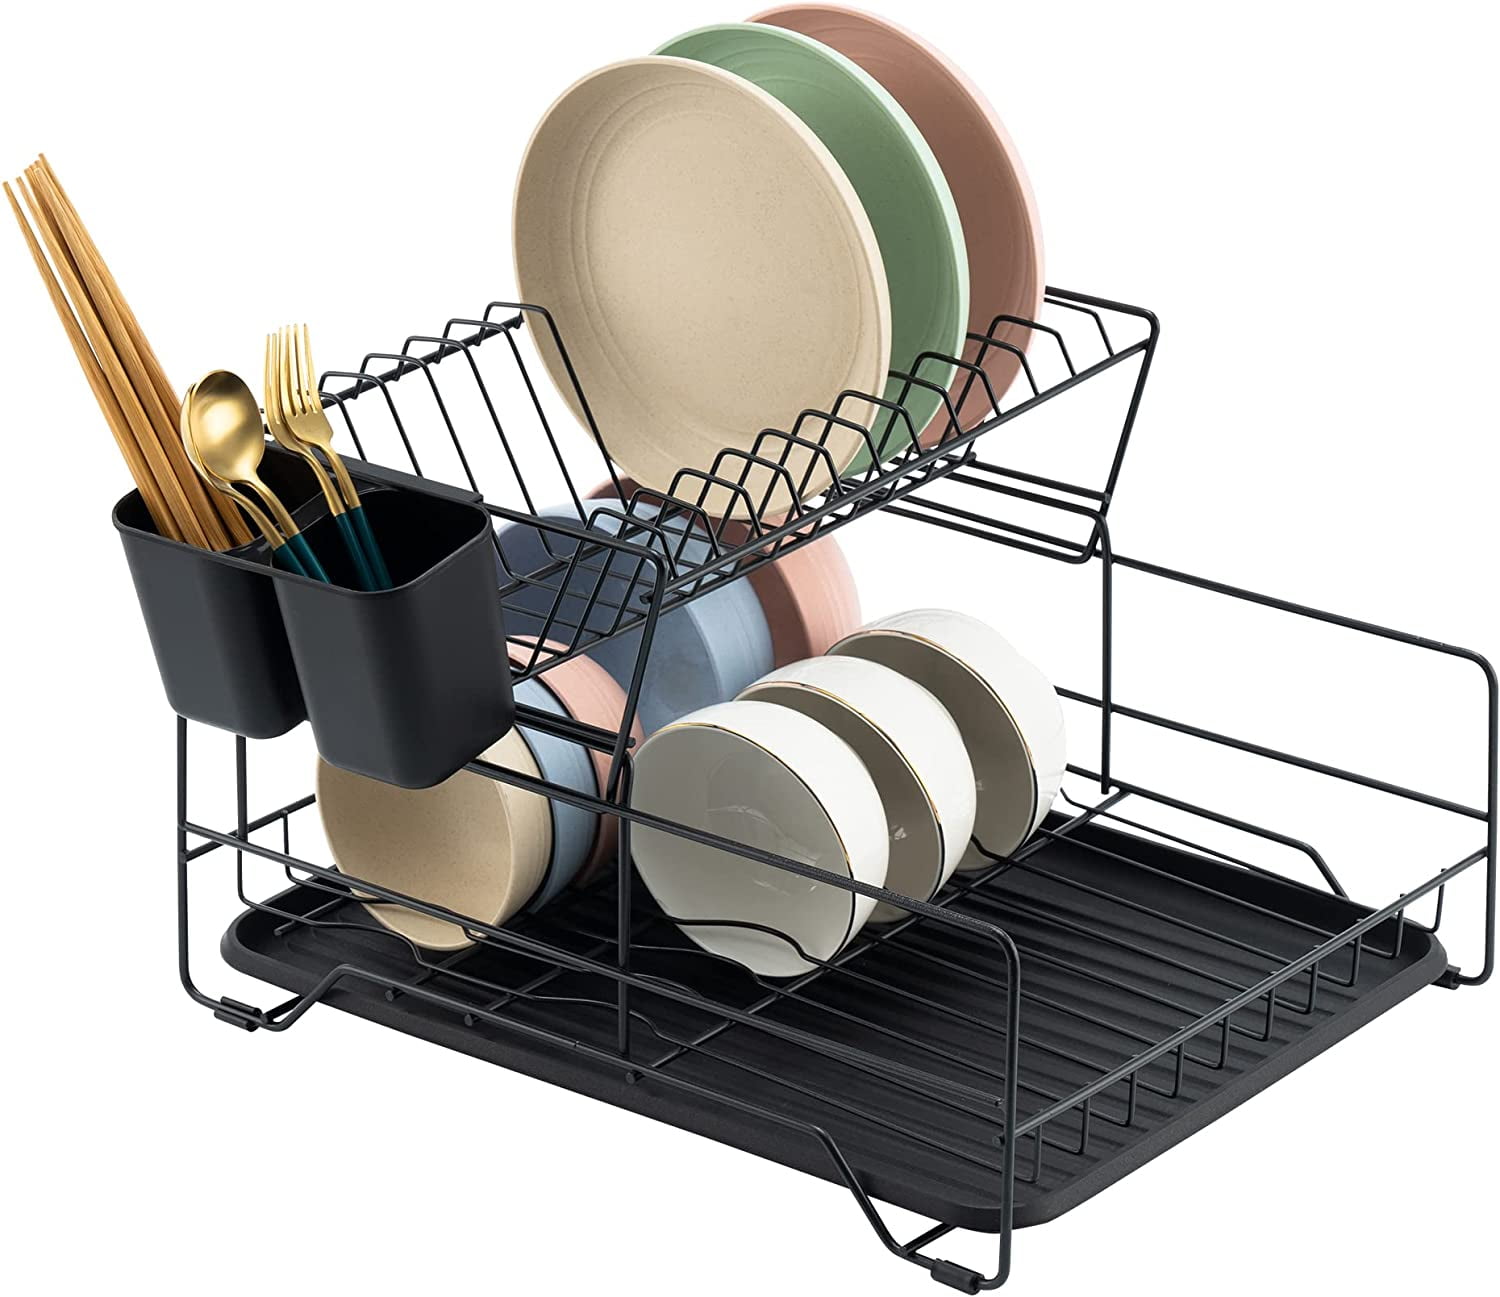 Home Shark 2 Tier Dish Drainer Rack Set, White Counter Rust-Resistant Draining Dish Rack Drainer for Kitchen